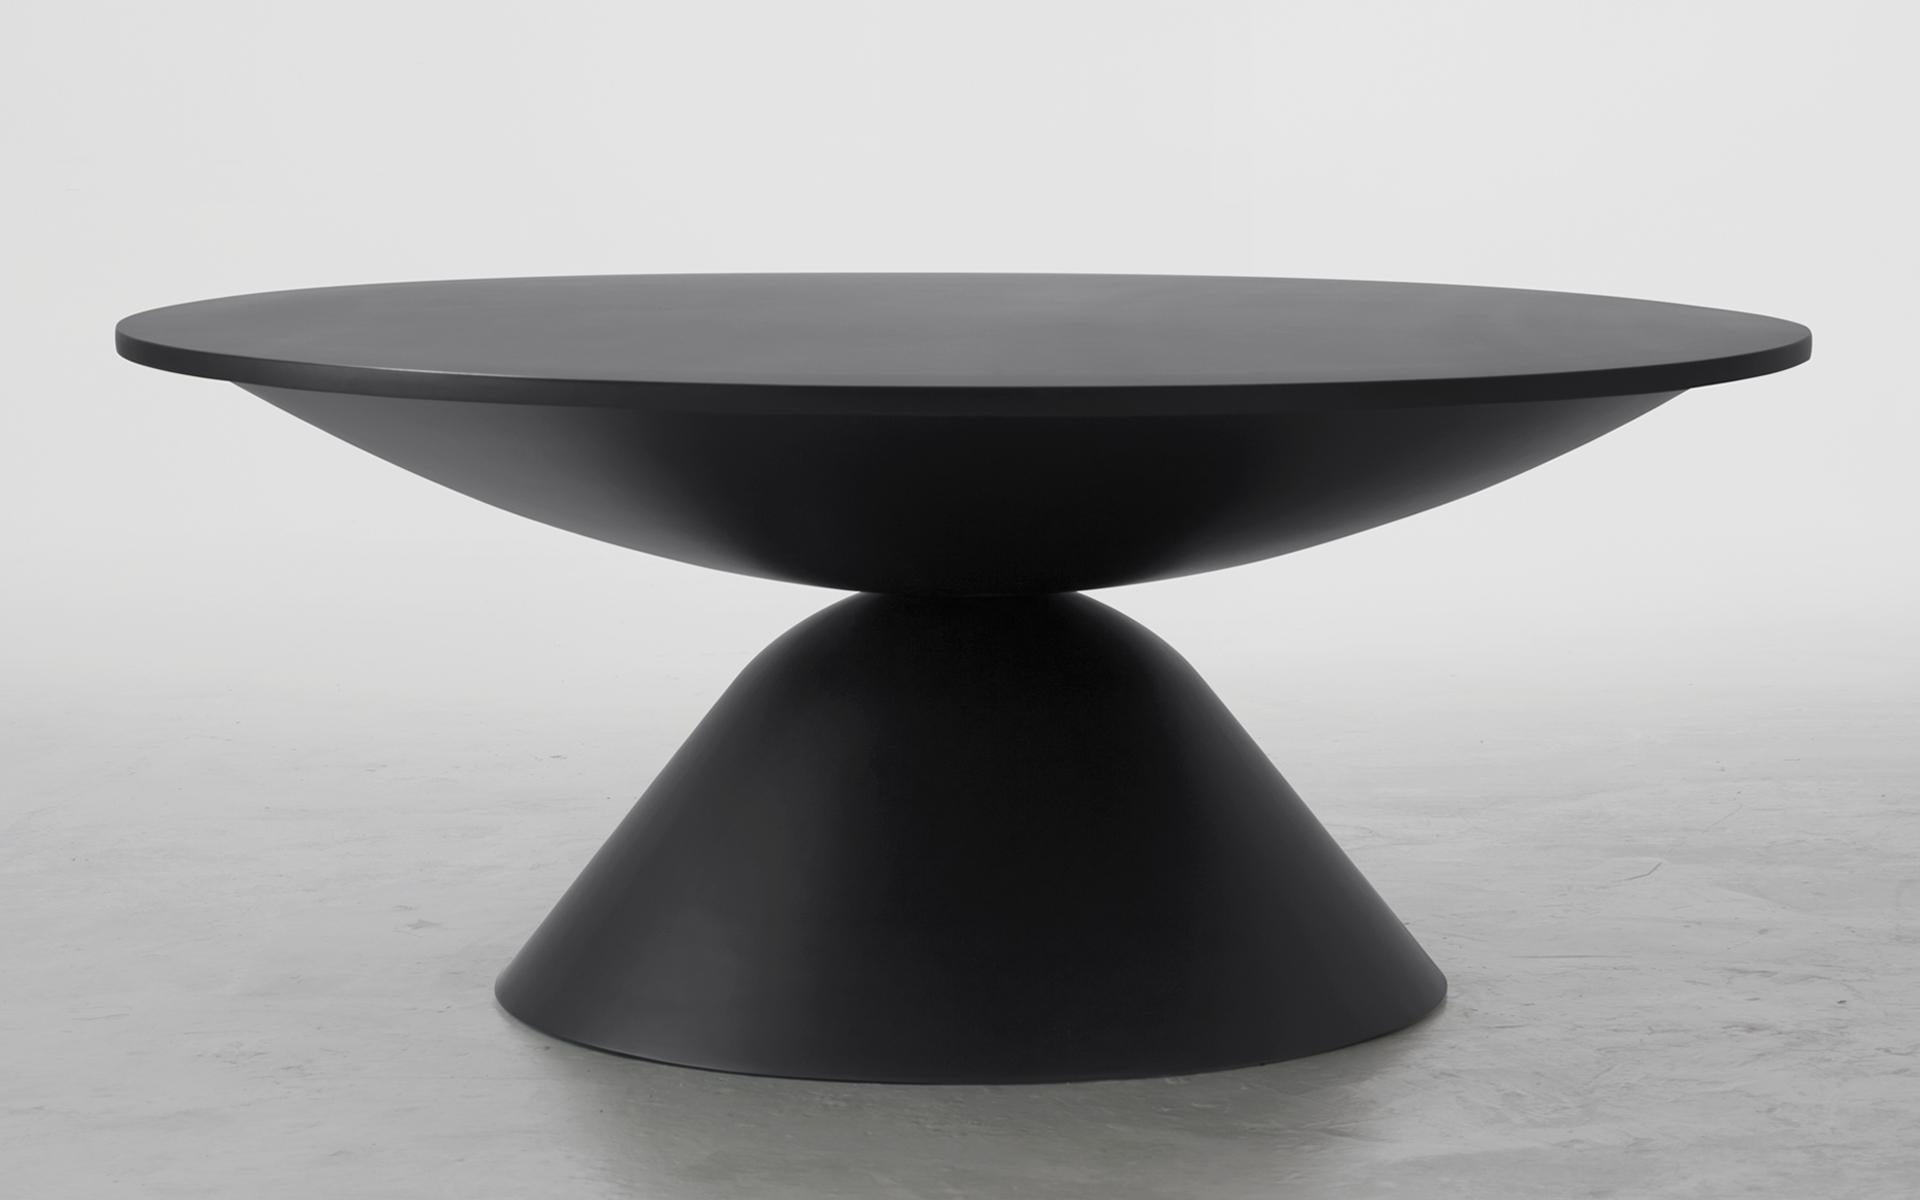 Plateau table 190 by Imperfettolab
Dimensions: Ø 190 x H 74 cm
Materials: Fiberglass
Available in black and white.

Imperfetto Lab
Who we are? We are a family.
Verter Turroni, Emanuela Ravelli and our children Elia, Margherita and